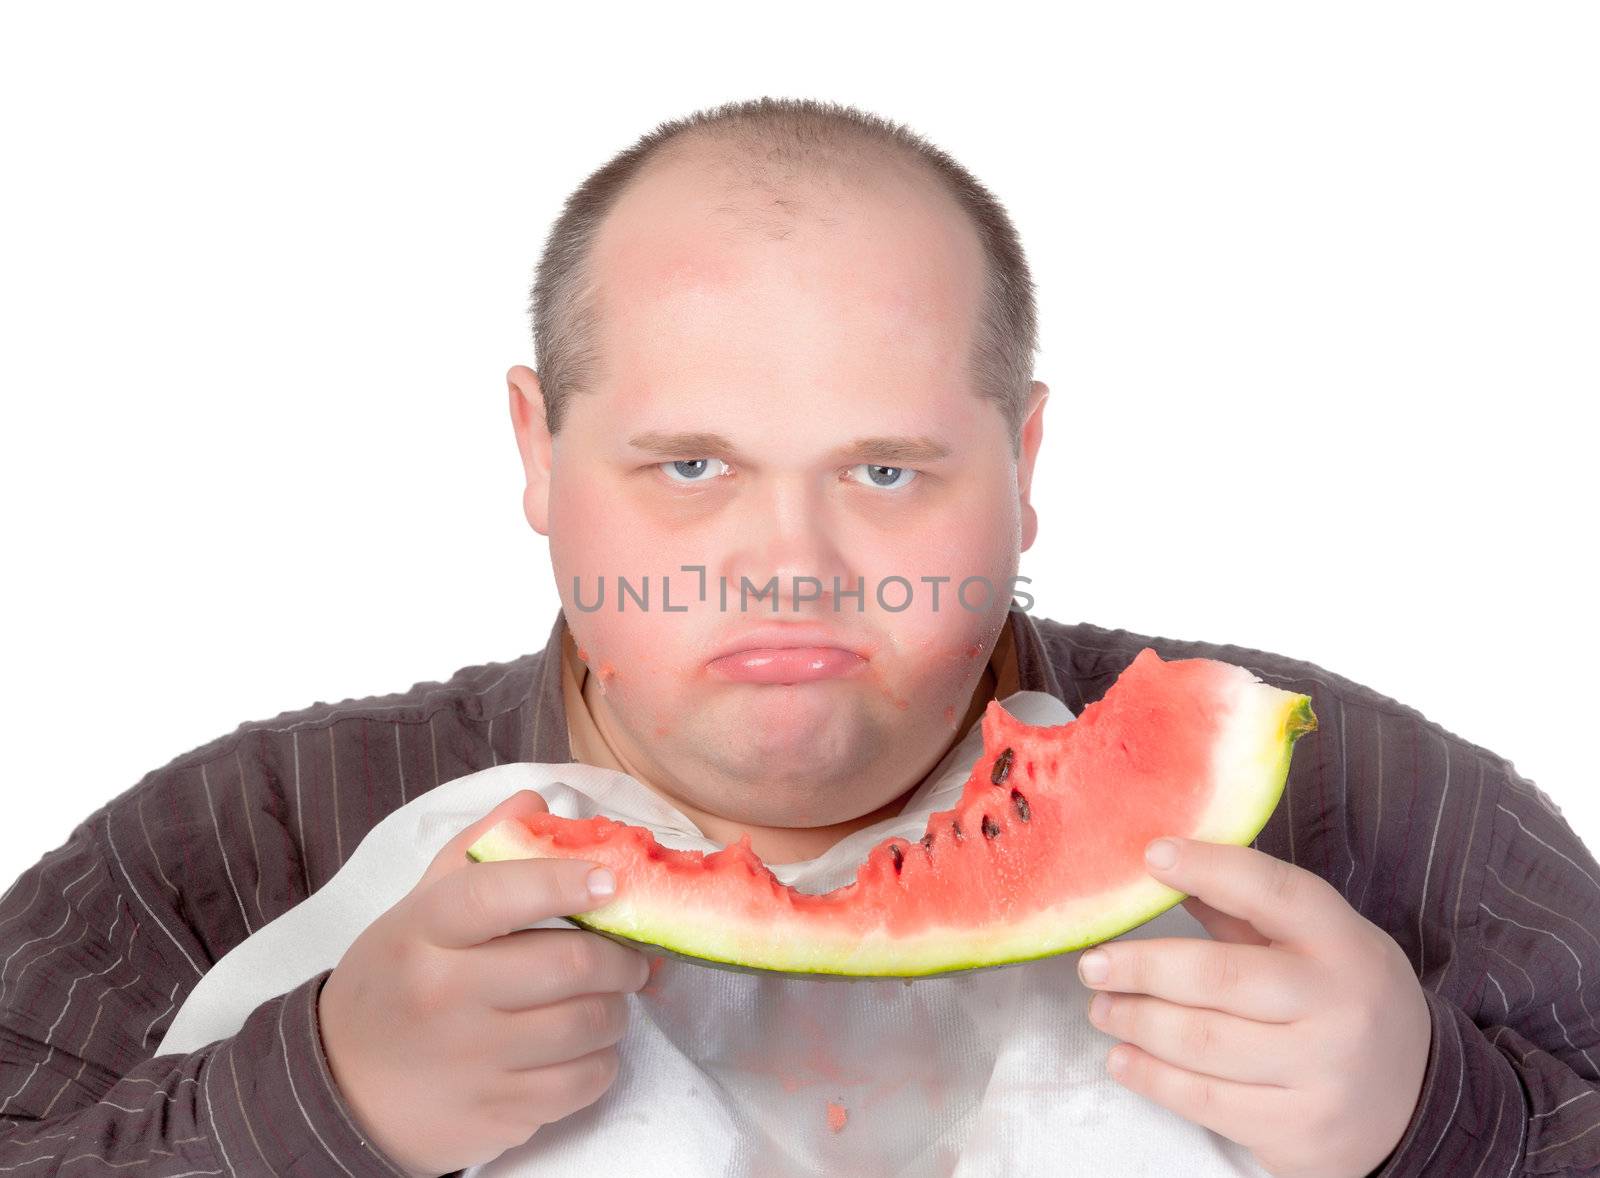 Obese man possessive of his food by Discovod